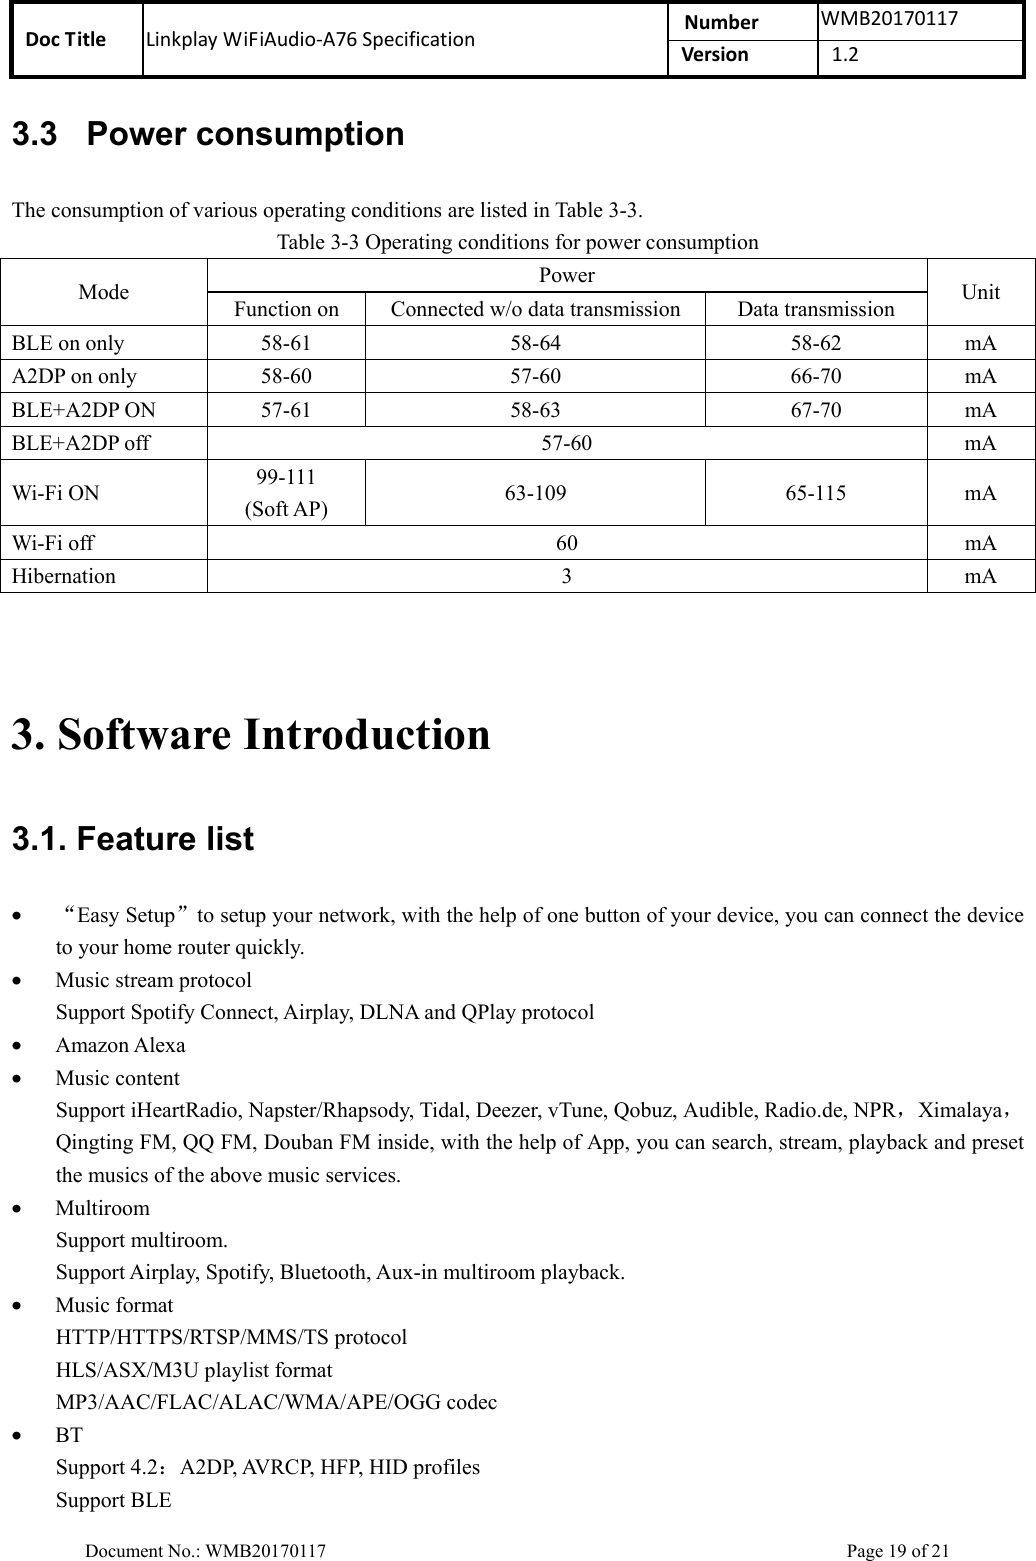 Doc Title  Linkplay WiFiAudio-A76 Specification  Number  WMB20170117Version  1.2  Document No.: WMB20170117    Page 19 of 21 3.3  Power consumption The consumption of various operating conditions are listed in Table 3-3. Table 3-3 Operating conditions for power consumption Mode  Power  Unit Function on  Connected w/o data transmission  Data transmission BLE on only  58-61  58-64  58-62  mA A2DP on only  58-60  57-60  66-70  mA BLE+A2DP ON  57-61  58-63  67-70  mA BLE+A2DP off  57-60  mA Wi-Fi ON  99-111 (Soft AP)  63-109  65-115  mA Wi-Fi off  60  mA Hibernation  3  mA   3. Software Introduction 3.1. Feature list • “Easy Setup”to setup your network, with the help of one button of your device, you can connect the device to your home router quickly. • Music stream protocol Support Spotify Connect, Airplay, DLNA and QPlay protocol • Amazon Alexa • Music content Support iHeartRadio, Napster/Rhapsody, Tidal, Deezer, vTune, Qobuz, Audible, Radio.de, NPR，Ximalaya，Qingting FM, QQ FM, Douban FM inside, with the help of App, you can search, stream, playback and preset the musics of the above music services. • Multiroom Support multiroom. Support Airplay, Spotify, Bluetooth, Aux-in multiroom playback. • Music format HTTP/HTTPS/RTSP/MMS/TS protocol HLS/ASX/M3U playlist format MP3/AAC/FLAC/ALAC/WMA/APE/OGG codec • BT Support 4.2：A2DP, AVRCP, HFP, HID profiles Support BLE 